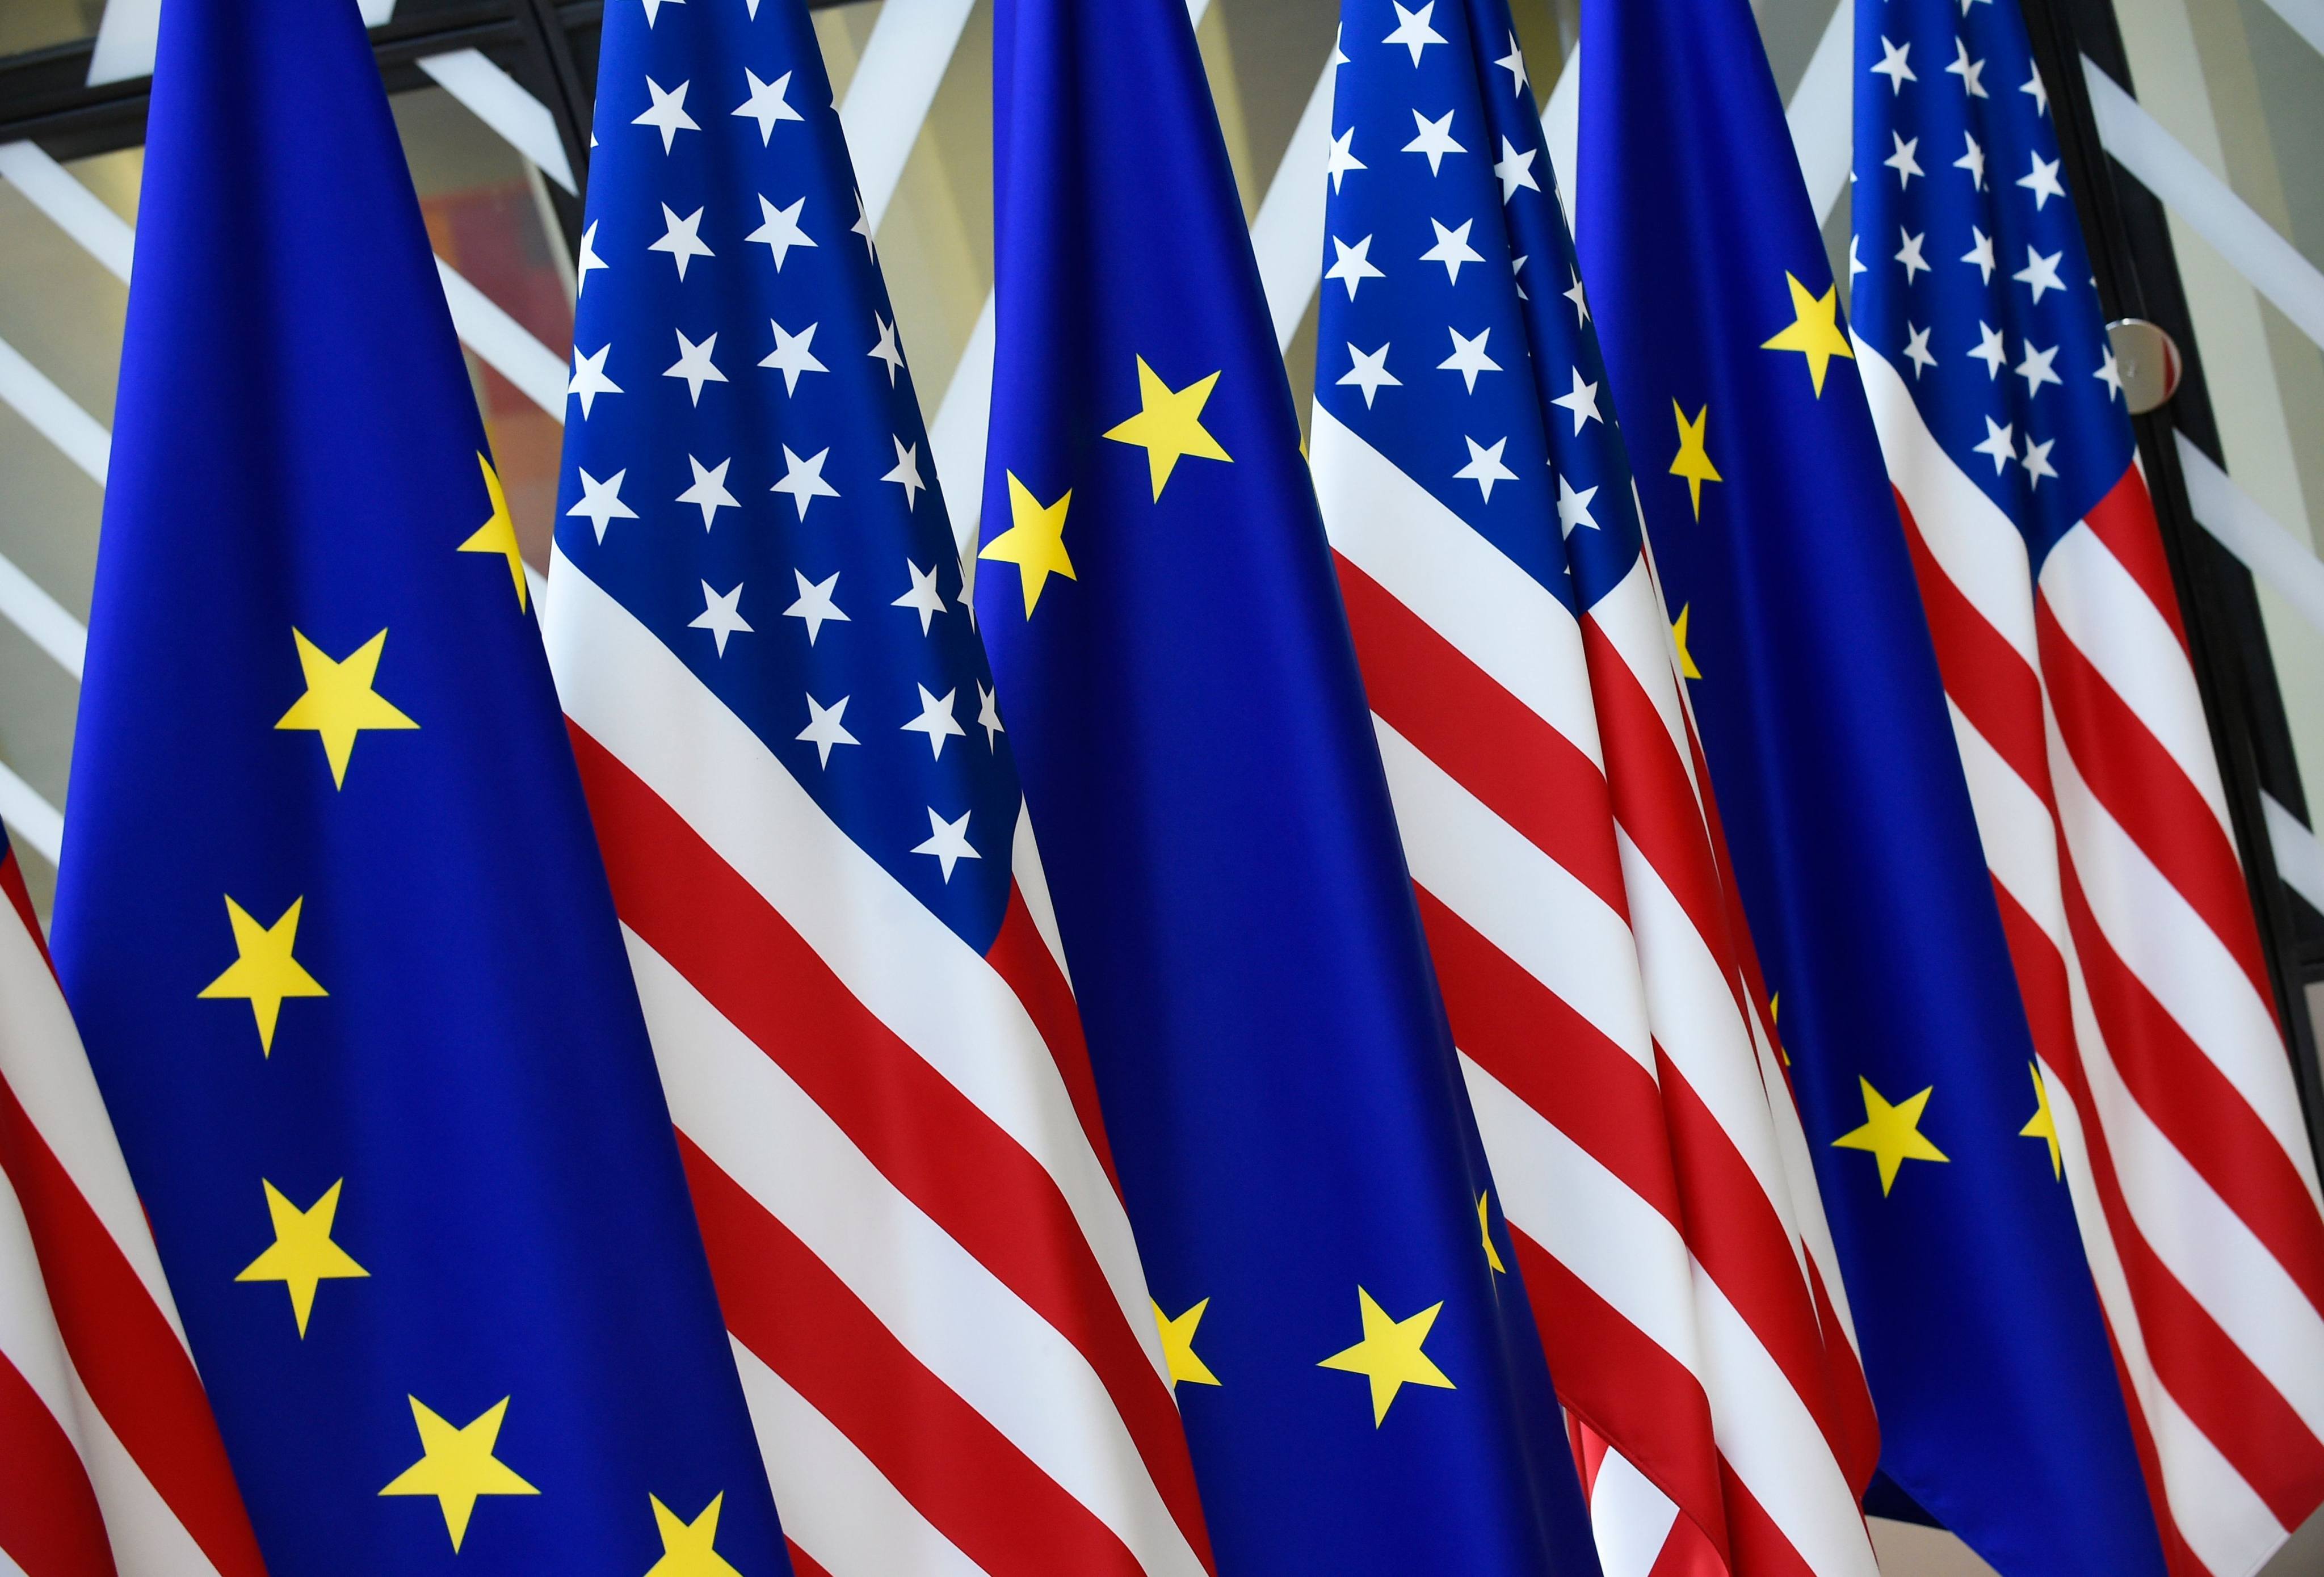 US and European Union flags are seen at the EU headquarters in Brussels. Photo: AFP